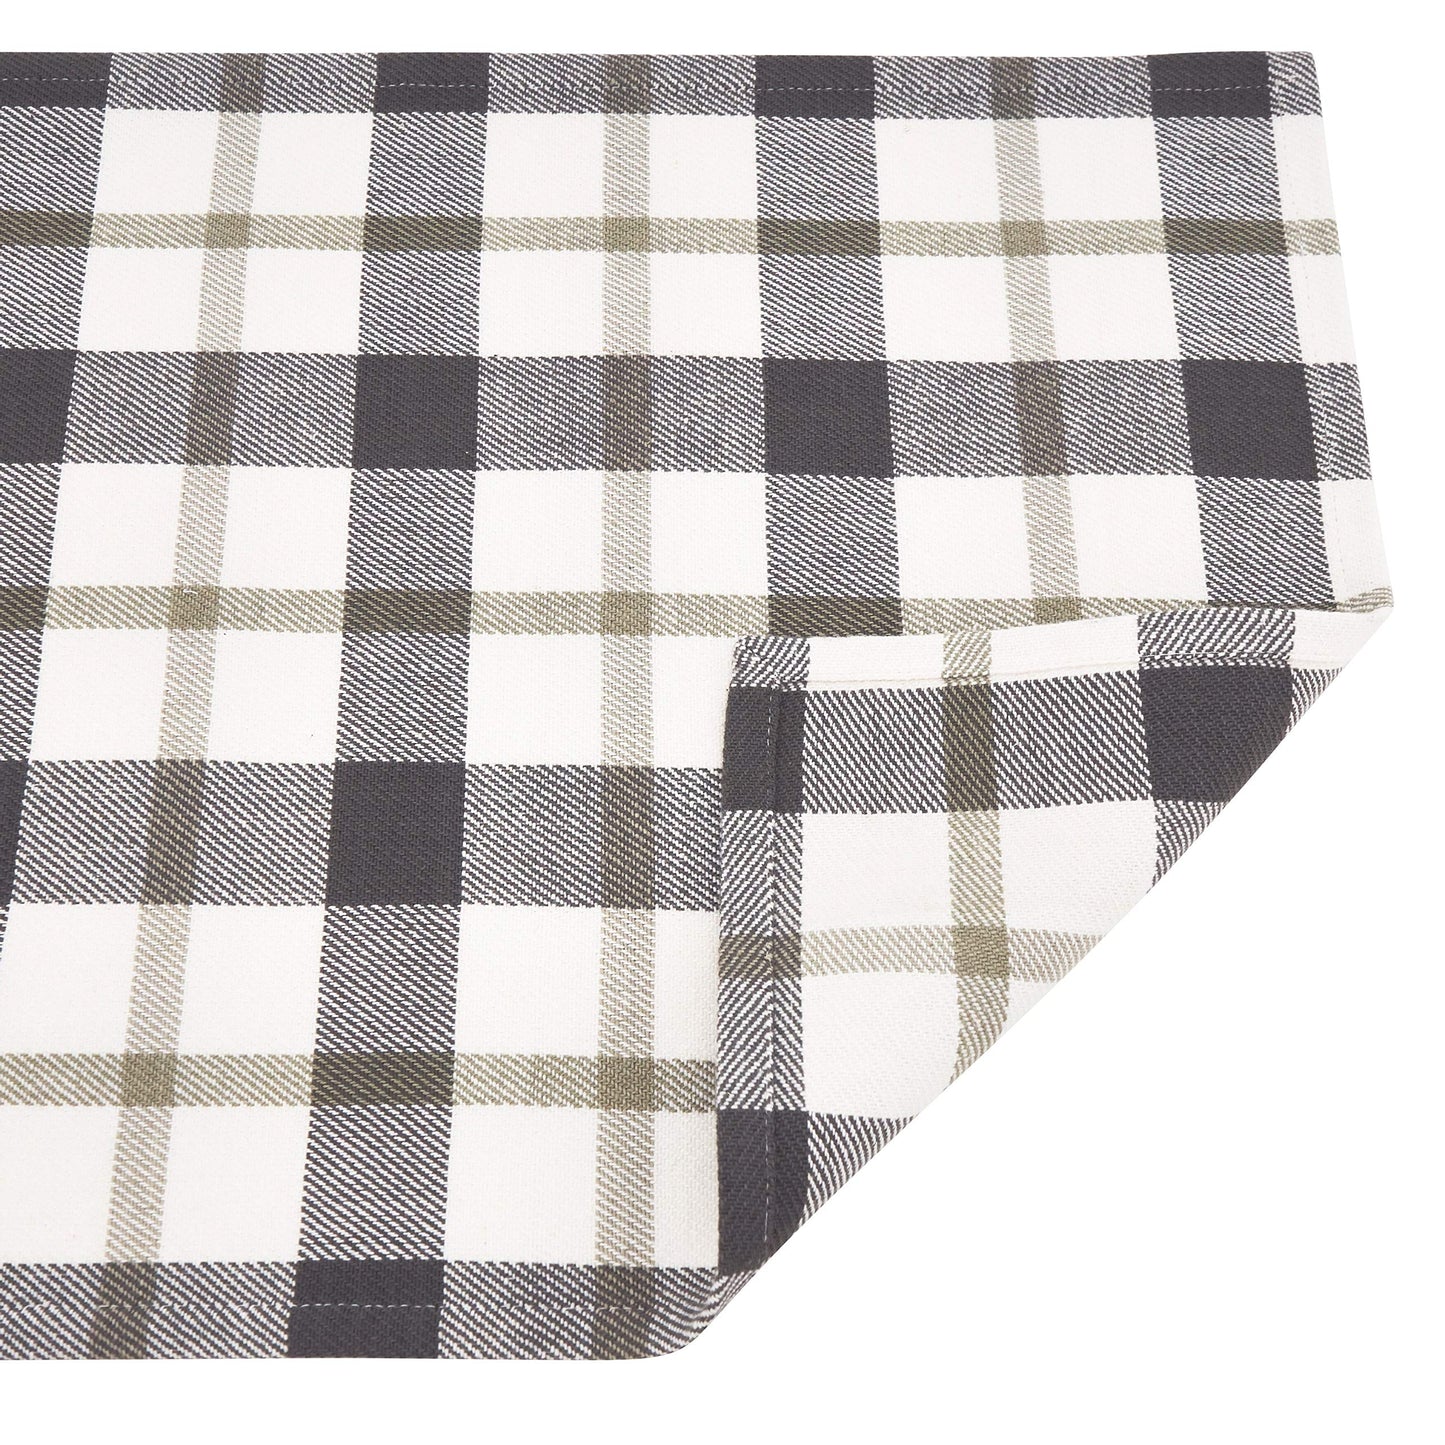 Fennco Styles Classic Plaid Design Tabletop Collection